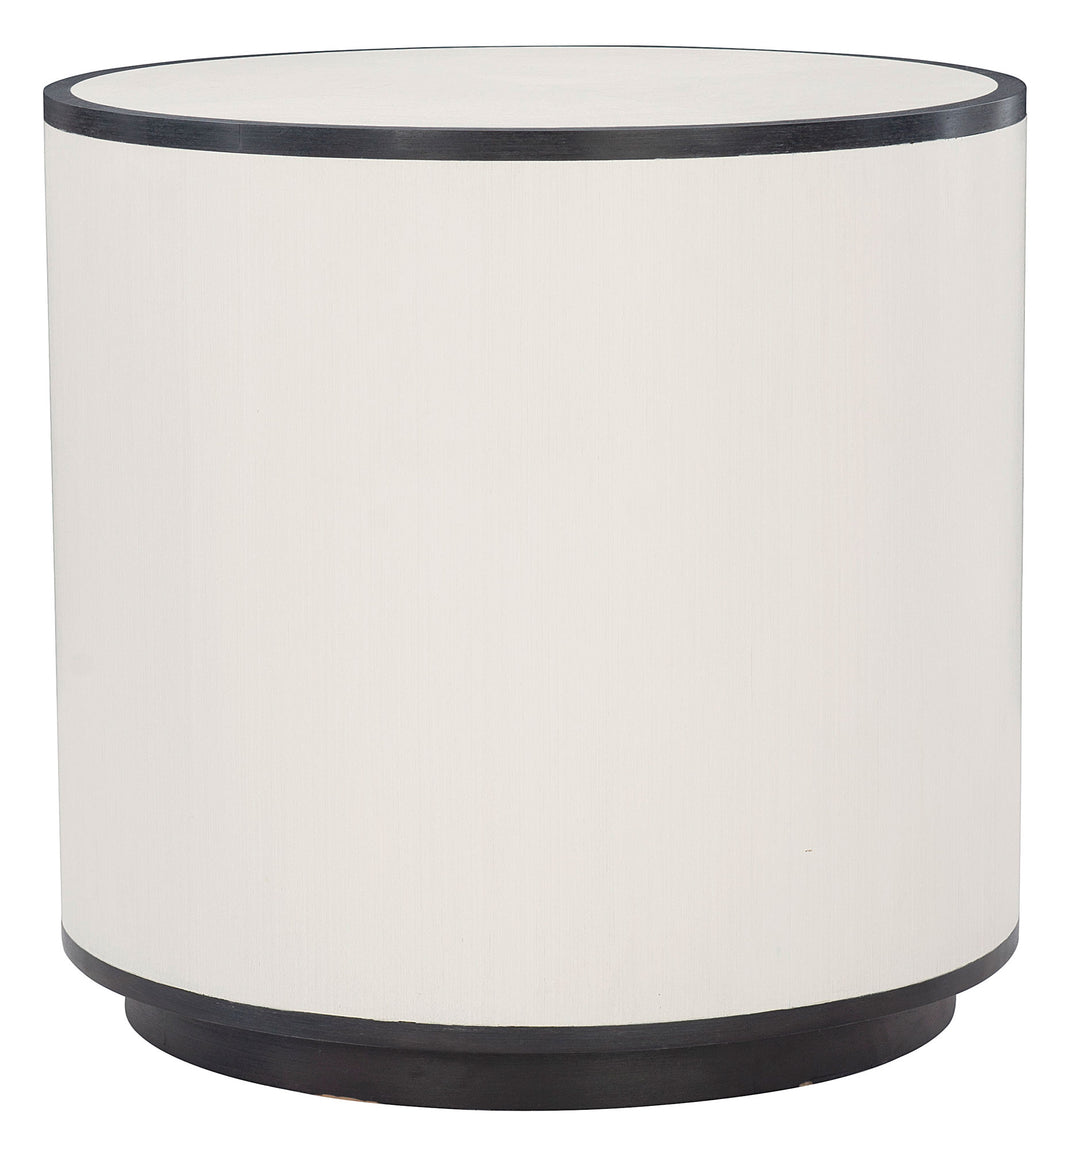 SILHOUETTE SIDE TABLE ROUND